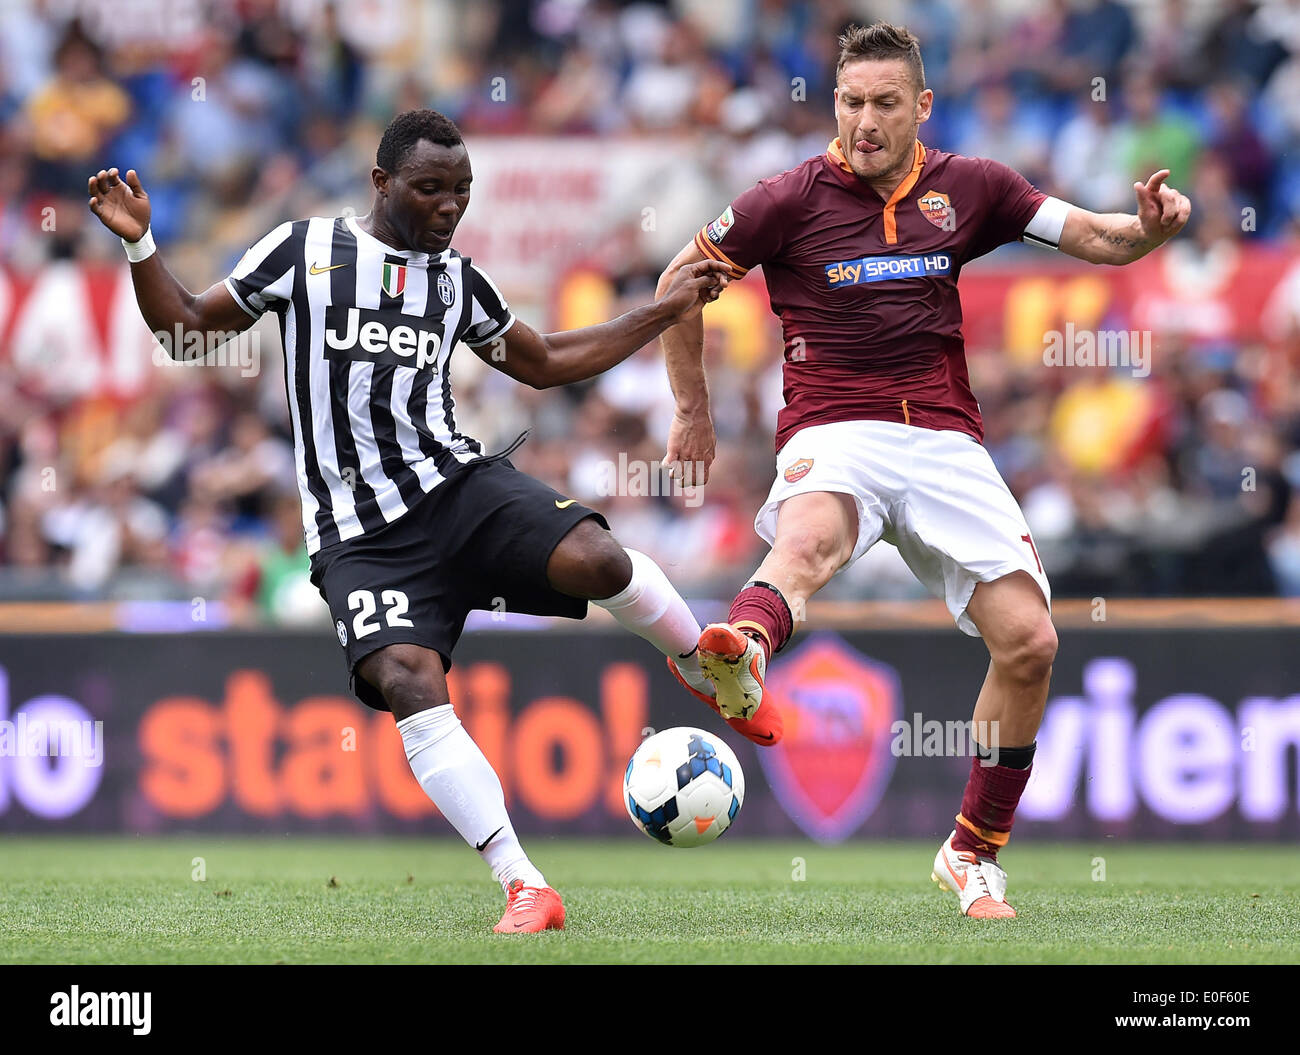 Rome, Italy. 11th May, 2014. Kwadwo Asamoah (L) of Juventus vies with Francesco Totti of Roma during their Italian Serie A soccer match in Rome, Italy, on May 11, 2014. Roma lost 0-1. Credit:  Alberto Lingria/Xinhua/Alamy Live News Stock Photo